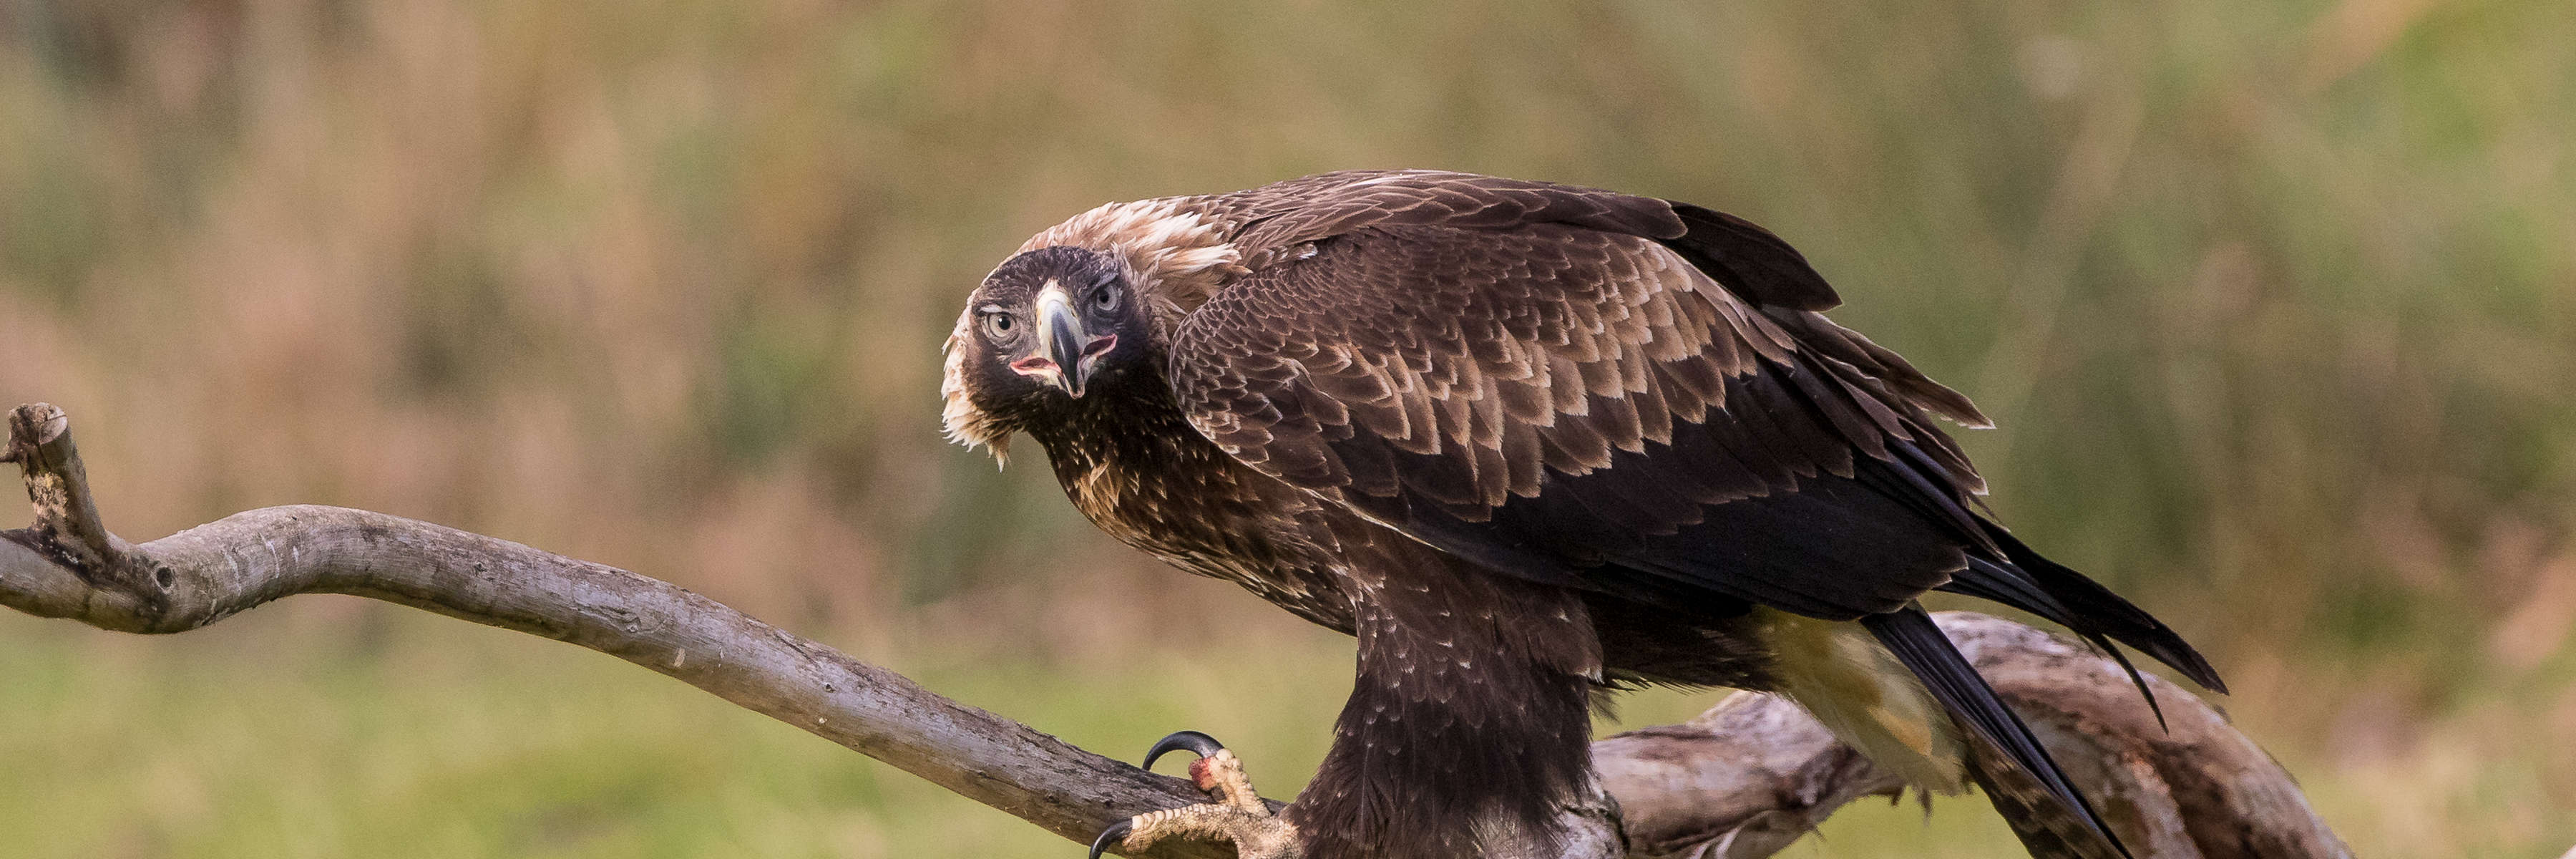 Close view of a wedge-tailed eagle on a dead branch, with head lowered, staring at the camera. Out of focus in the background is green grass and other vegetation. Photo: Alfred Schulte, taken at Inala on Bruny Island.